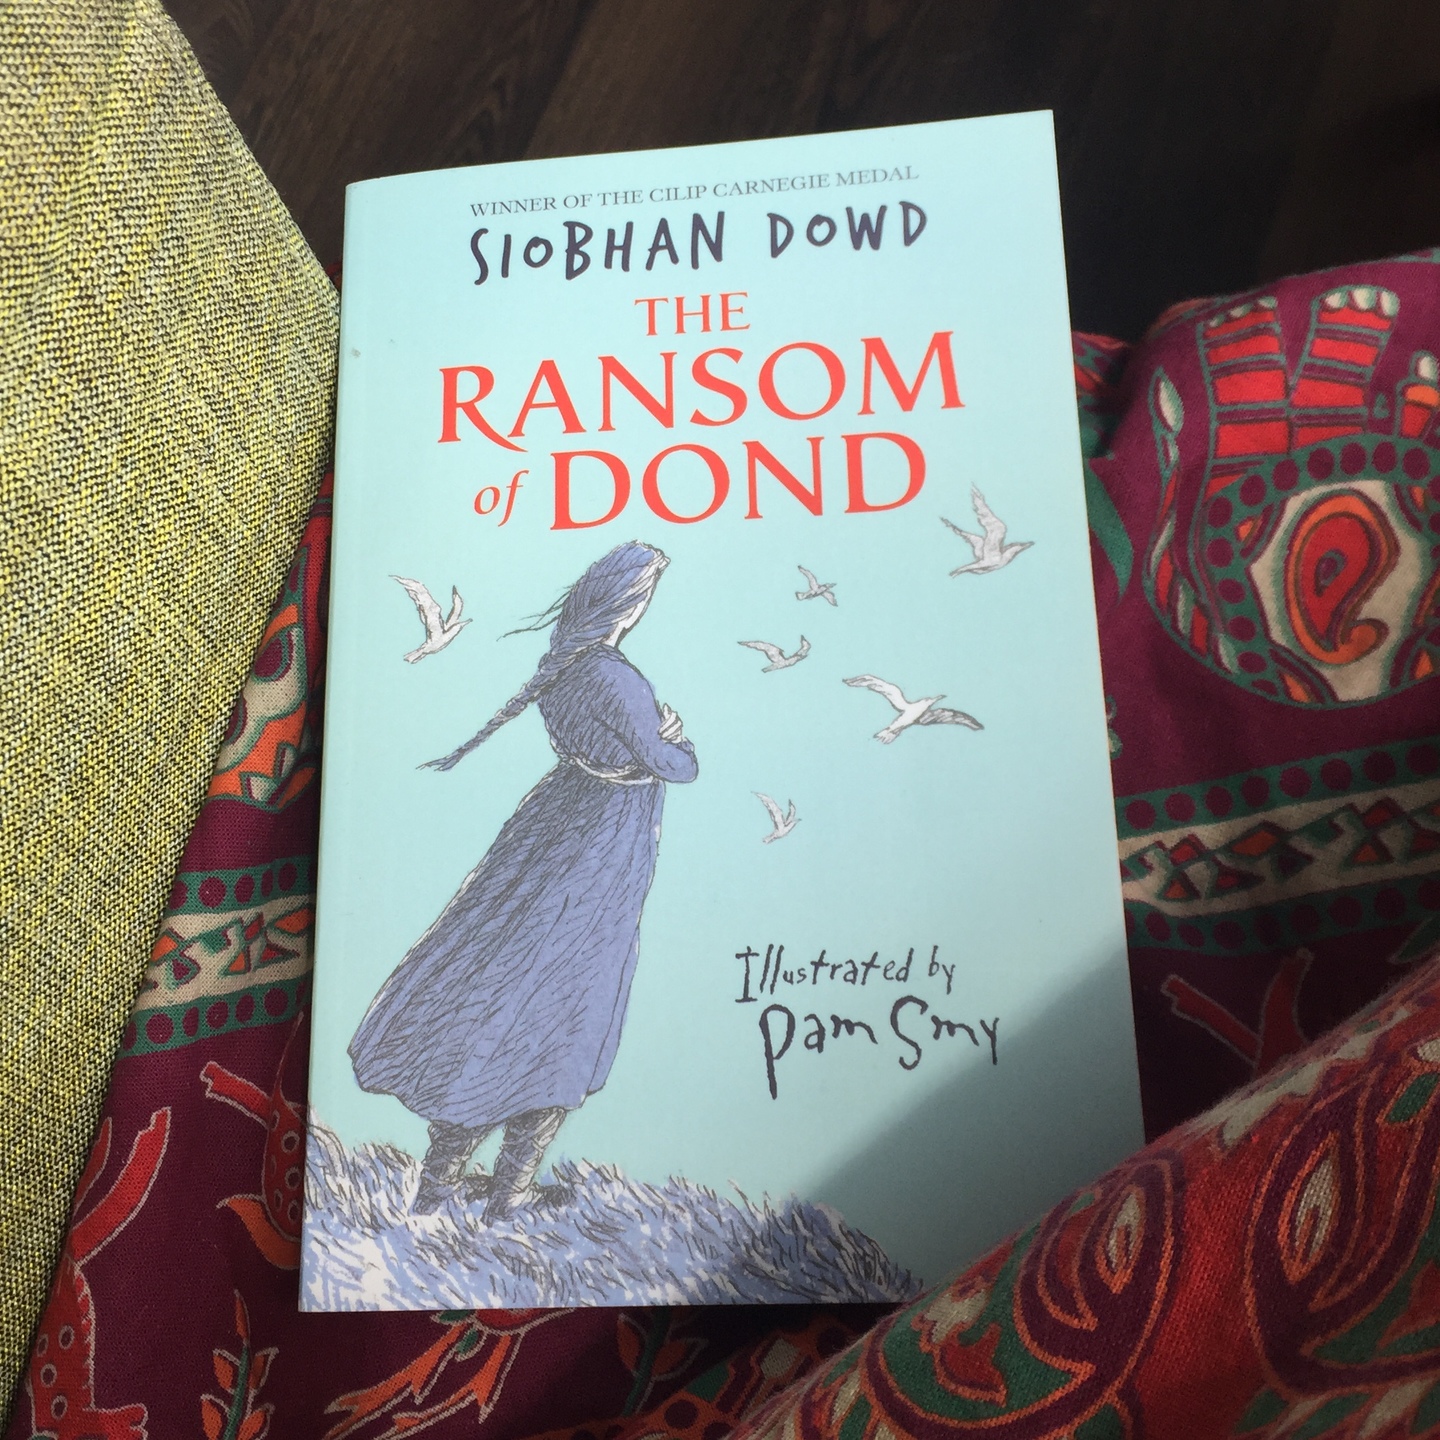 The Ransom of Dond by Siobhan Dowd [Paperback]